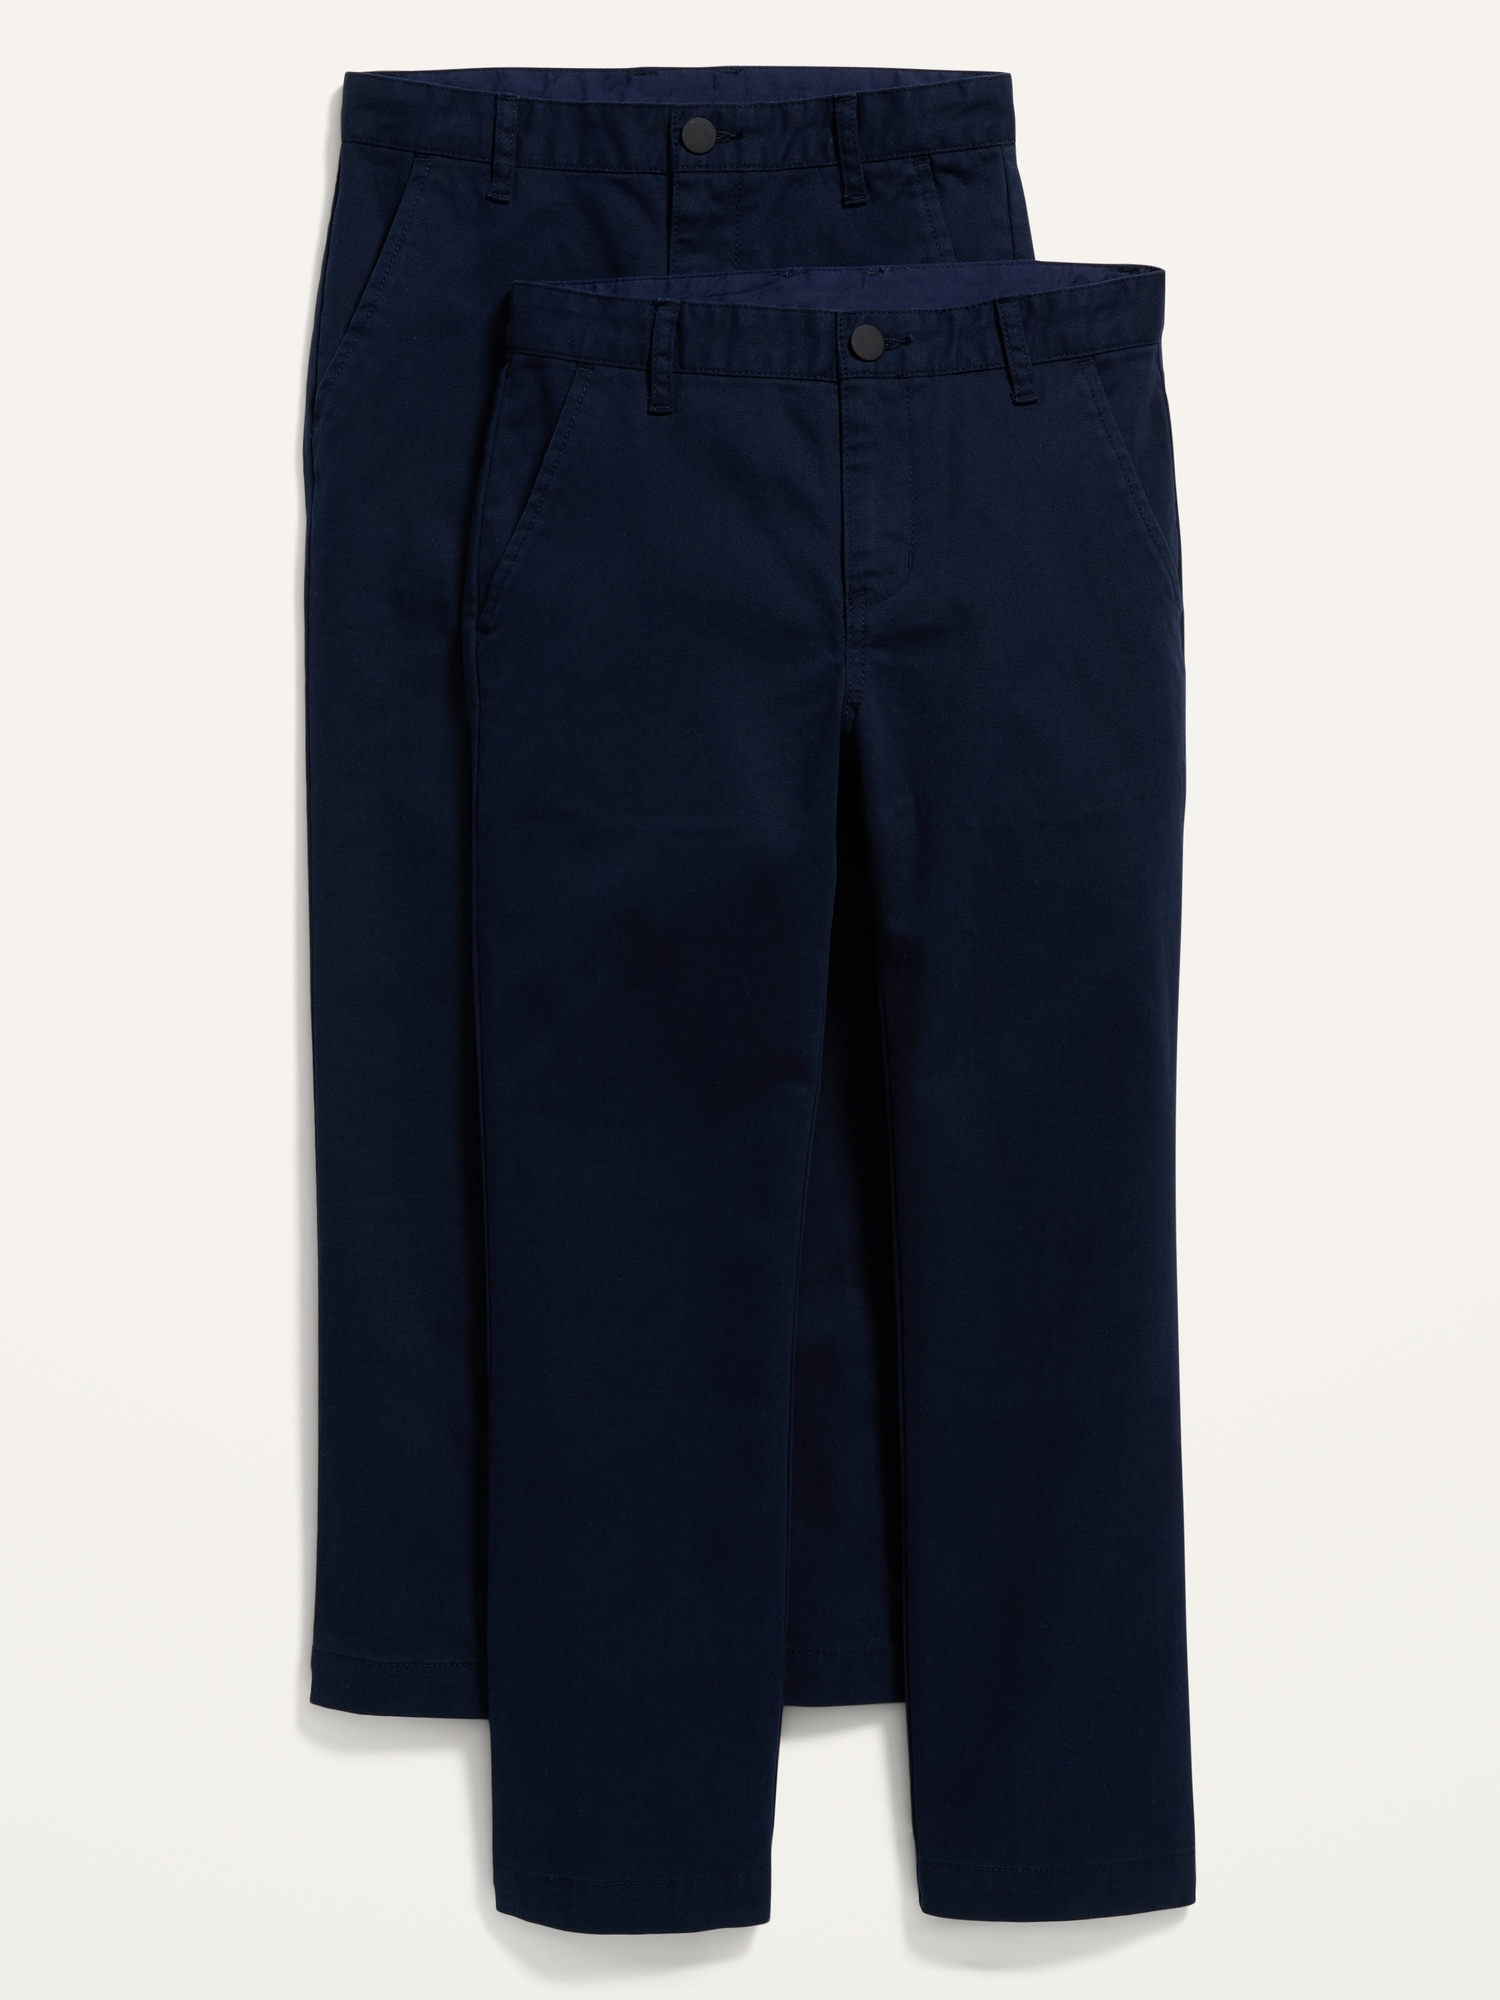 Old Navy Uniform Skinny Built-In Flex Chino Pants 2-Pack for Boys blue. 1